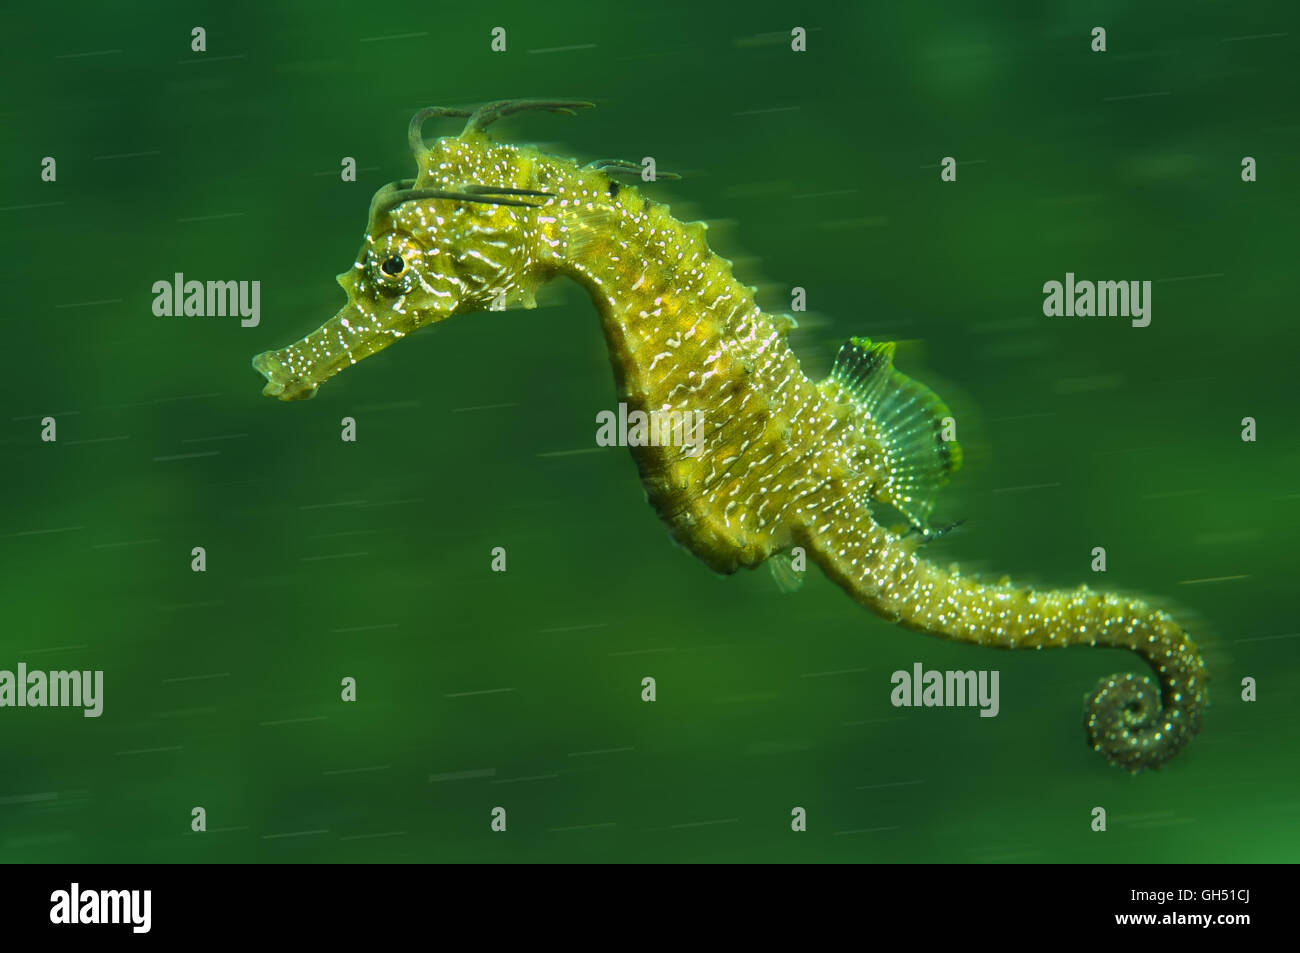 Maned Seahorse or Long-snouted seahorse (Hippocampus guttulatus) swims in the water column in Black Sea Stock Photo